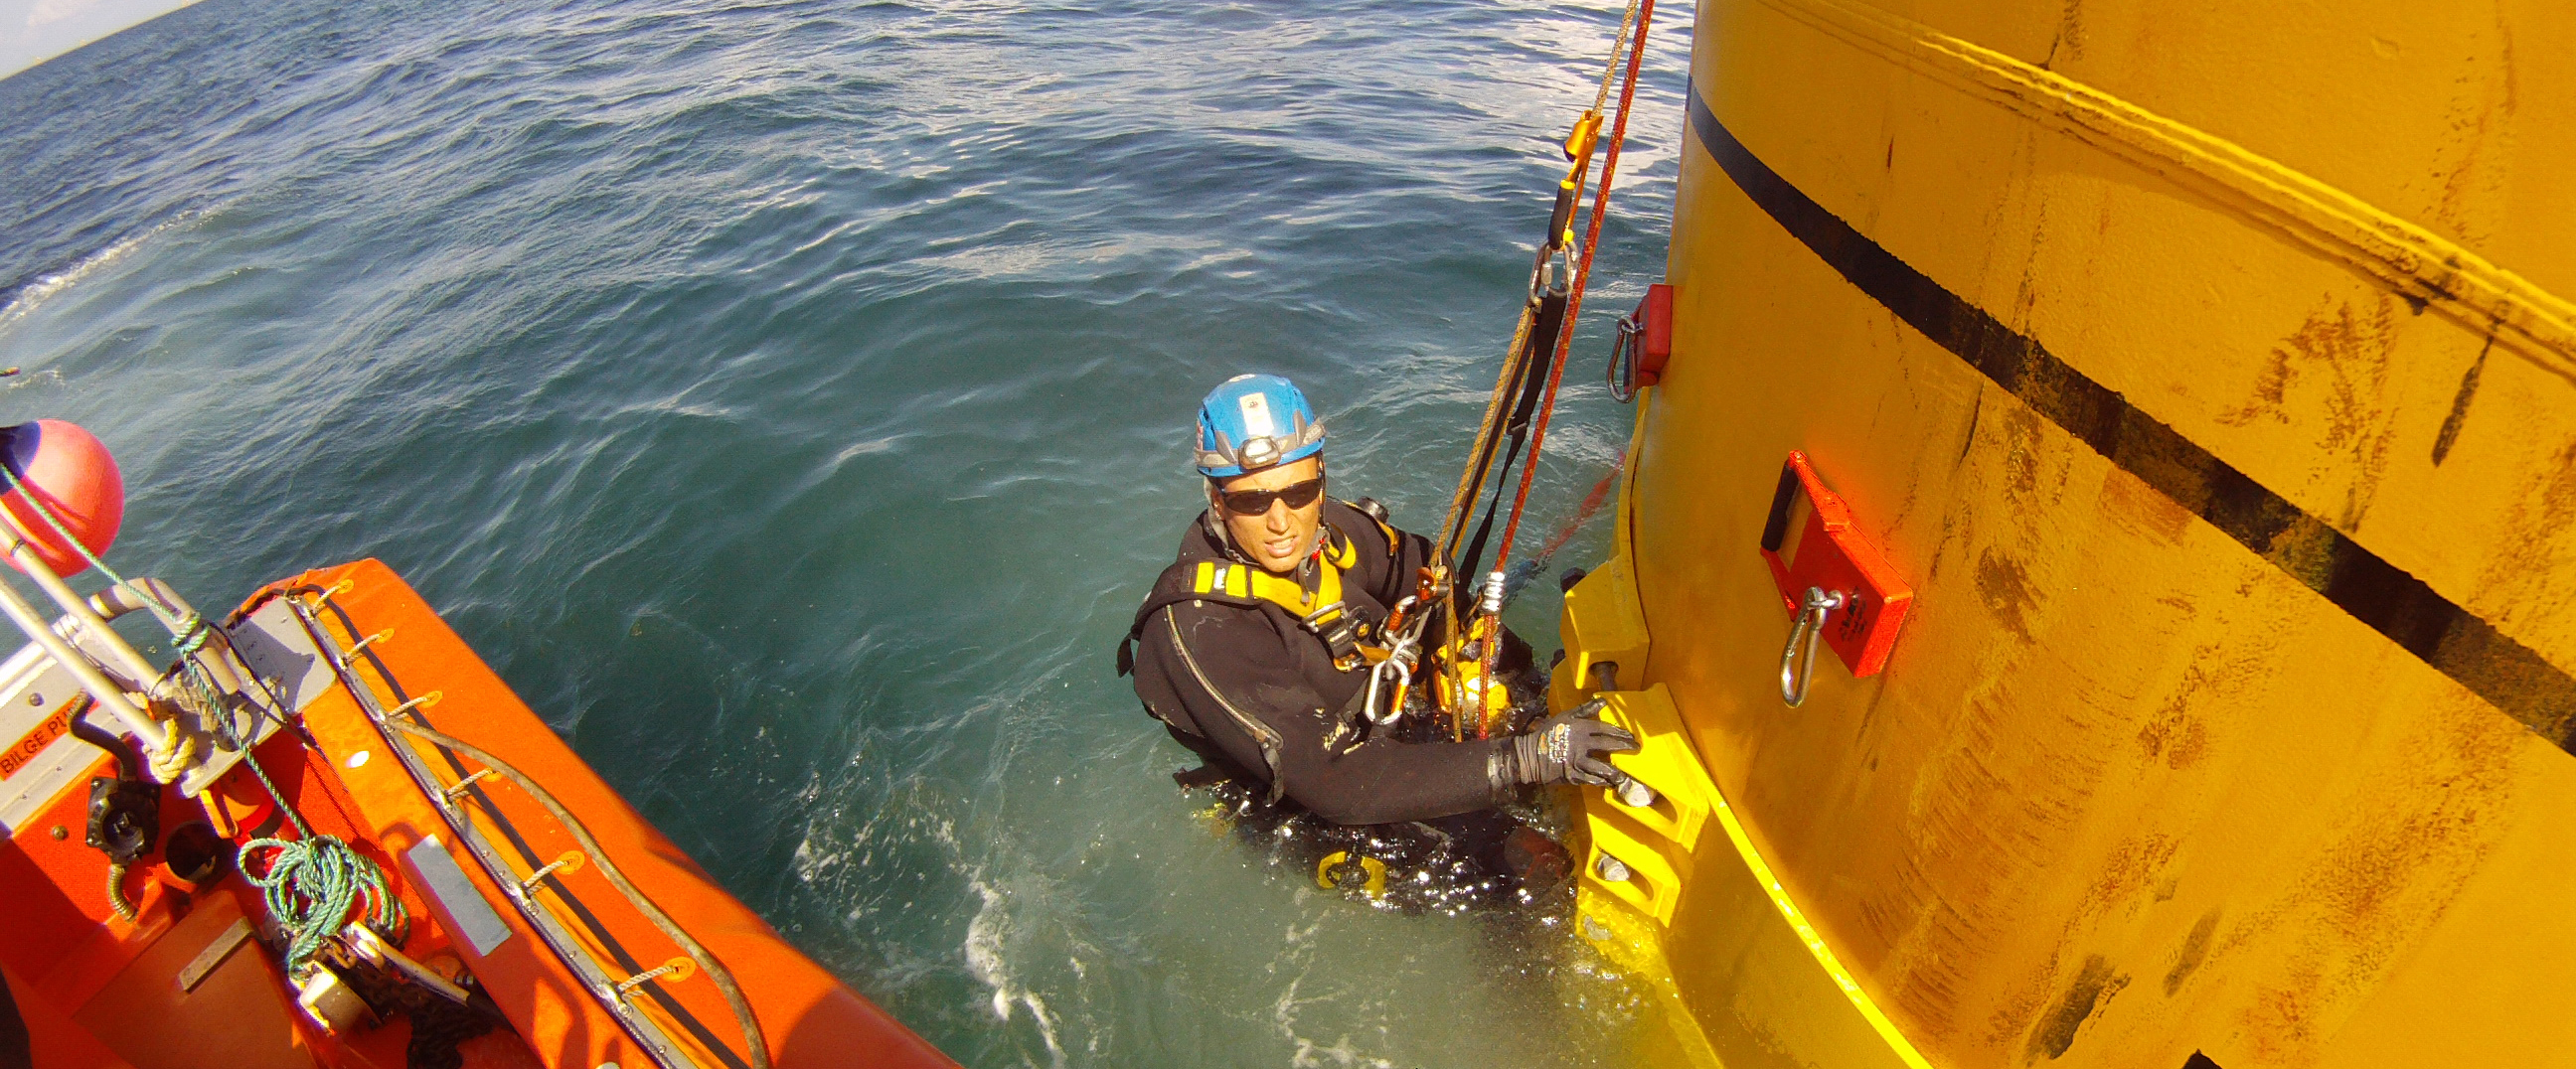 Execution of Inshore and Offshore diving work